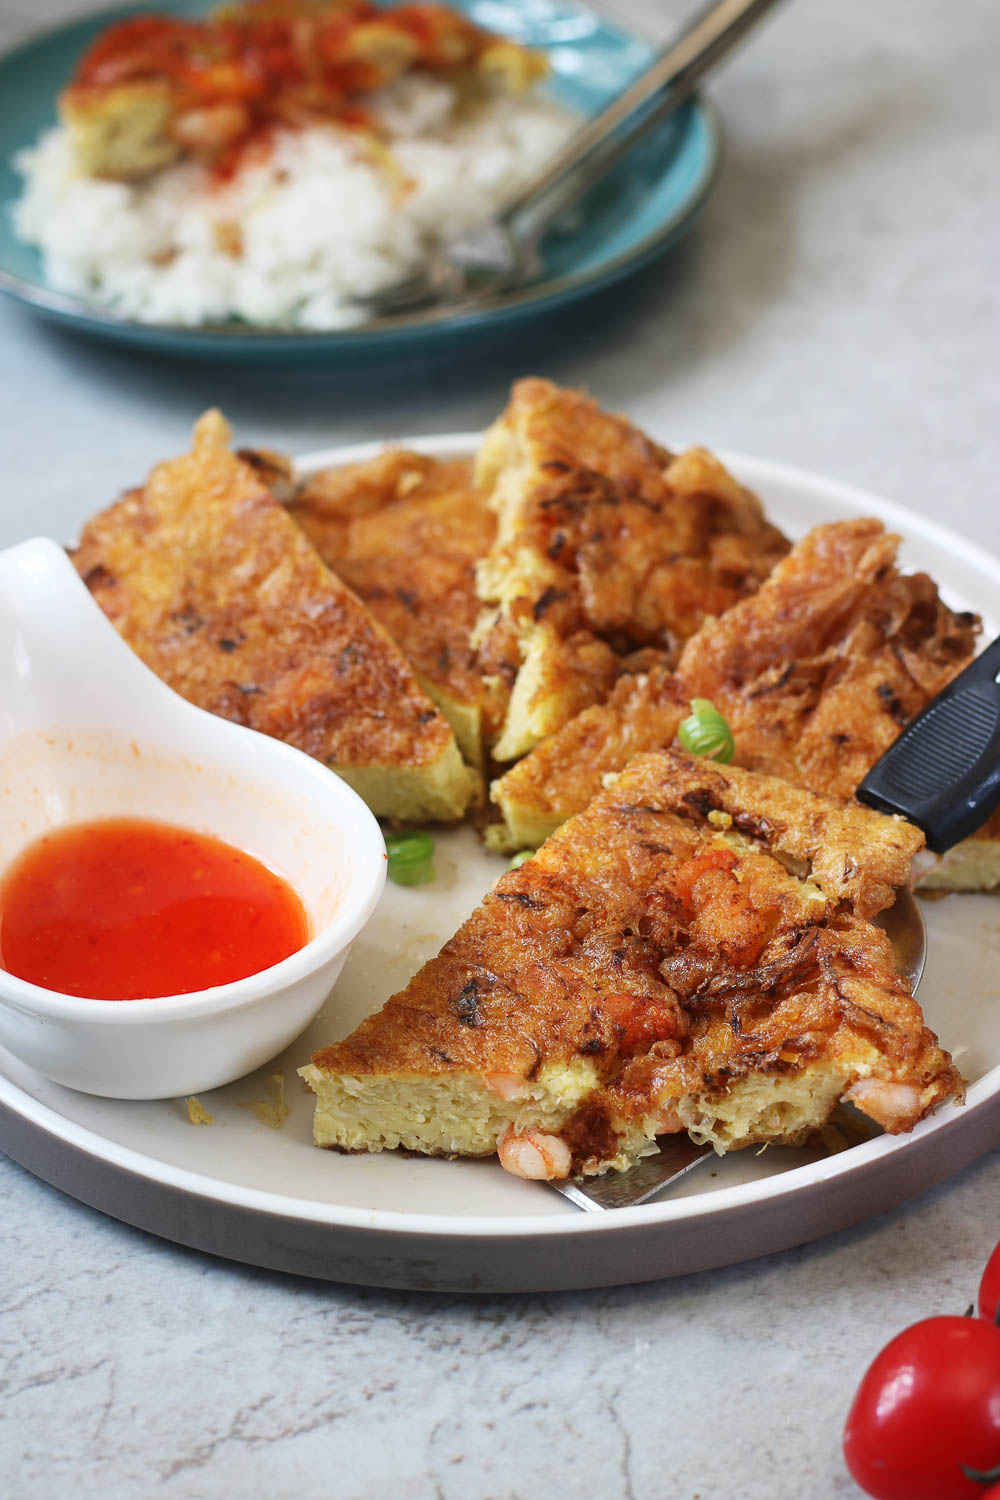 This delectable and easy shrimp egg foo young (Chinese omelet) is a basic, quick and comprehensive dish that you can make any time. It is the absolute BEST keto and low-carb recipe. Try this delicious classic using the restaurant preparation method!  